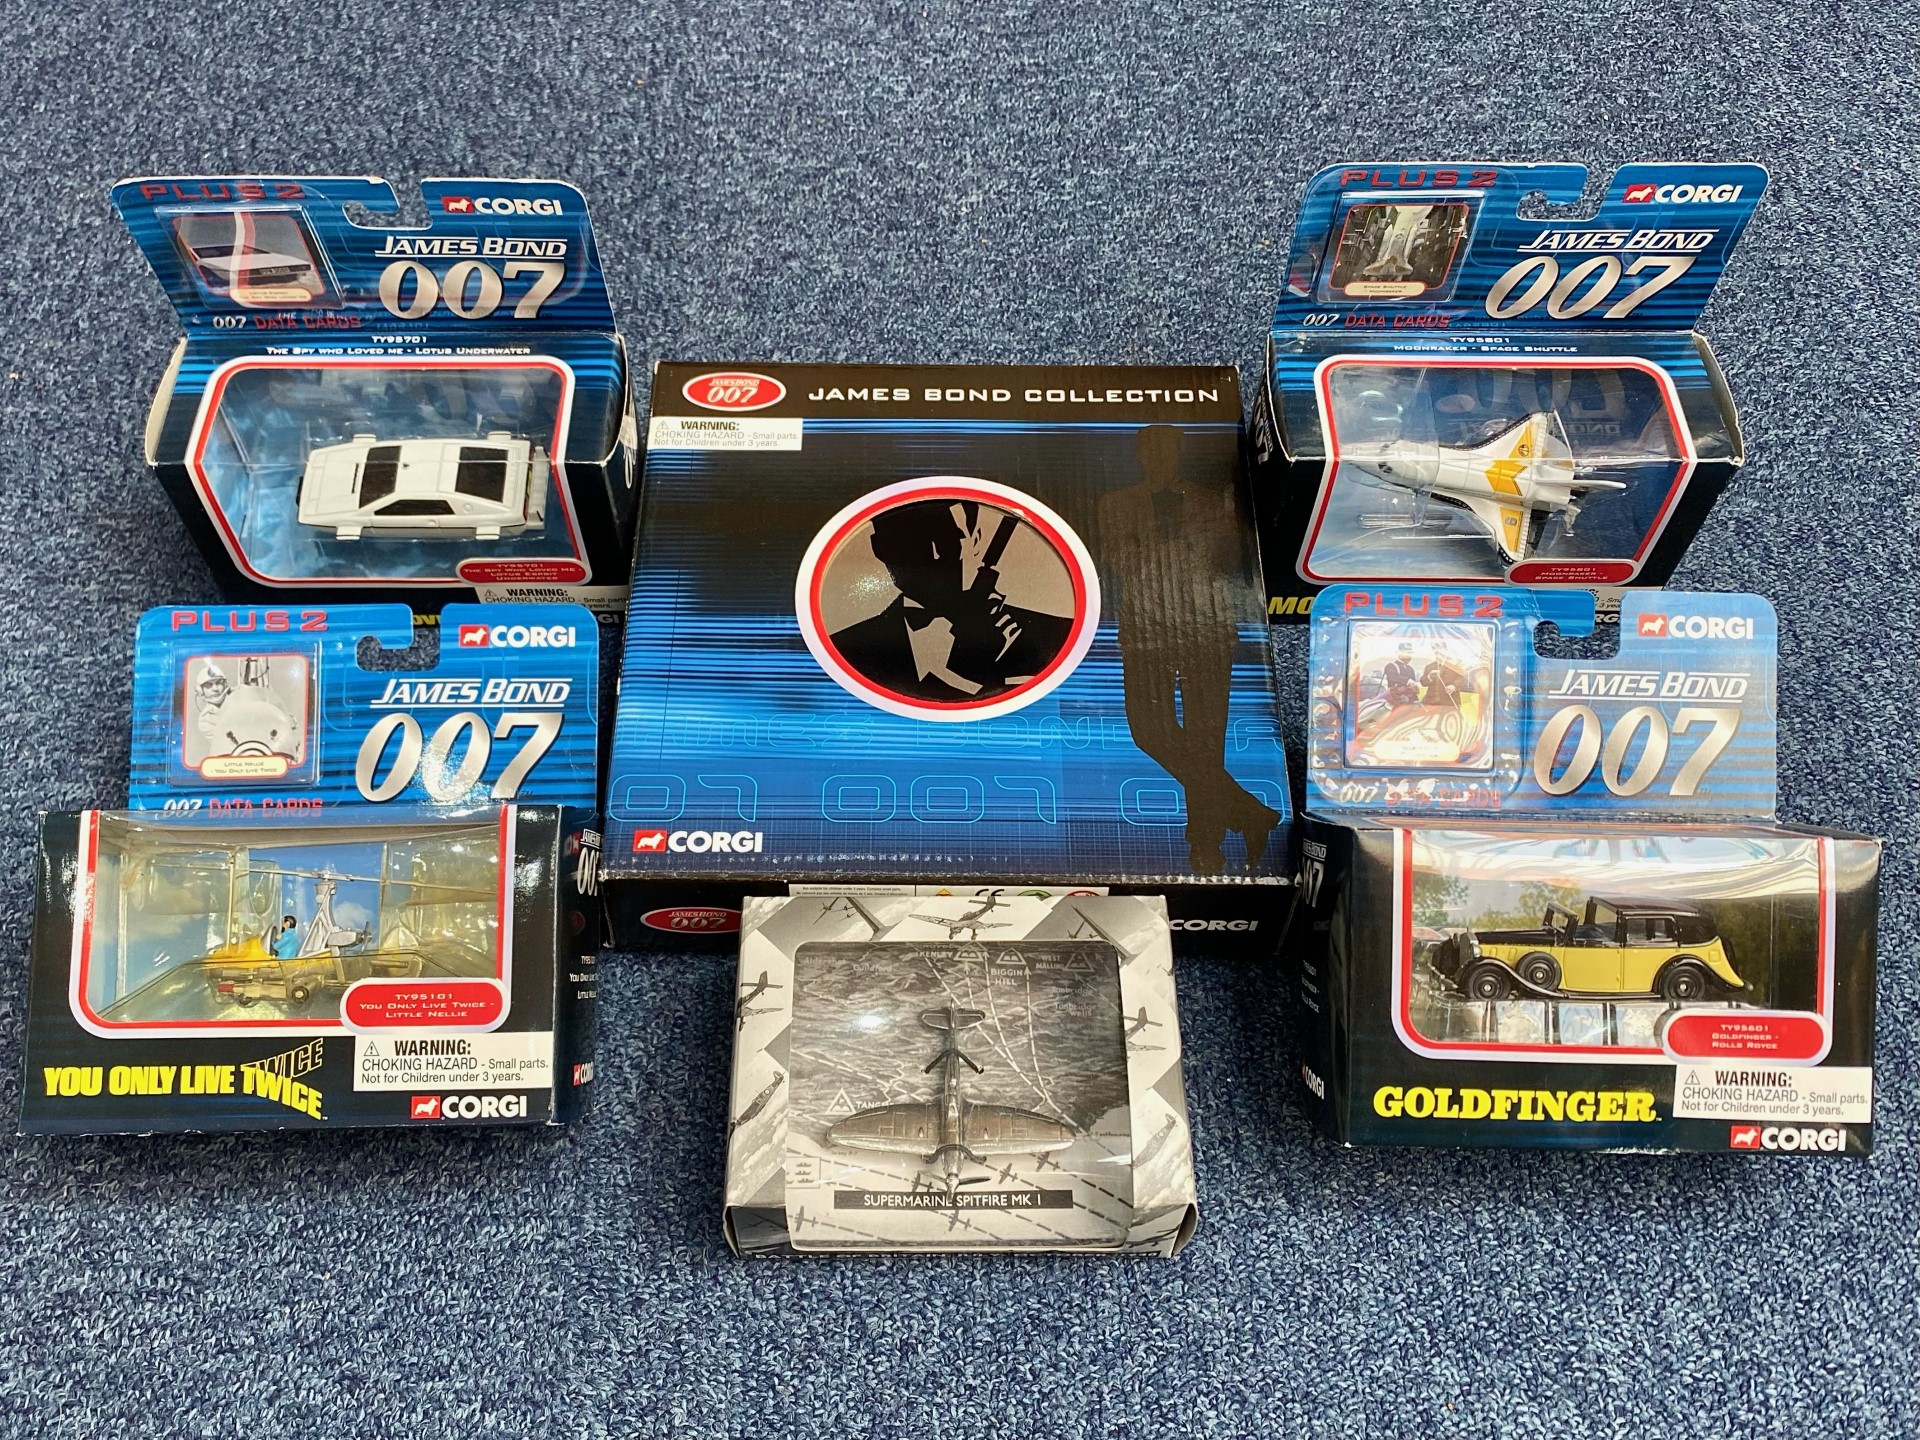 Corgi 007 Die Cast Model James Bond Collection, all boxed, comprising James Bond Film Canister Boxed